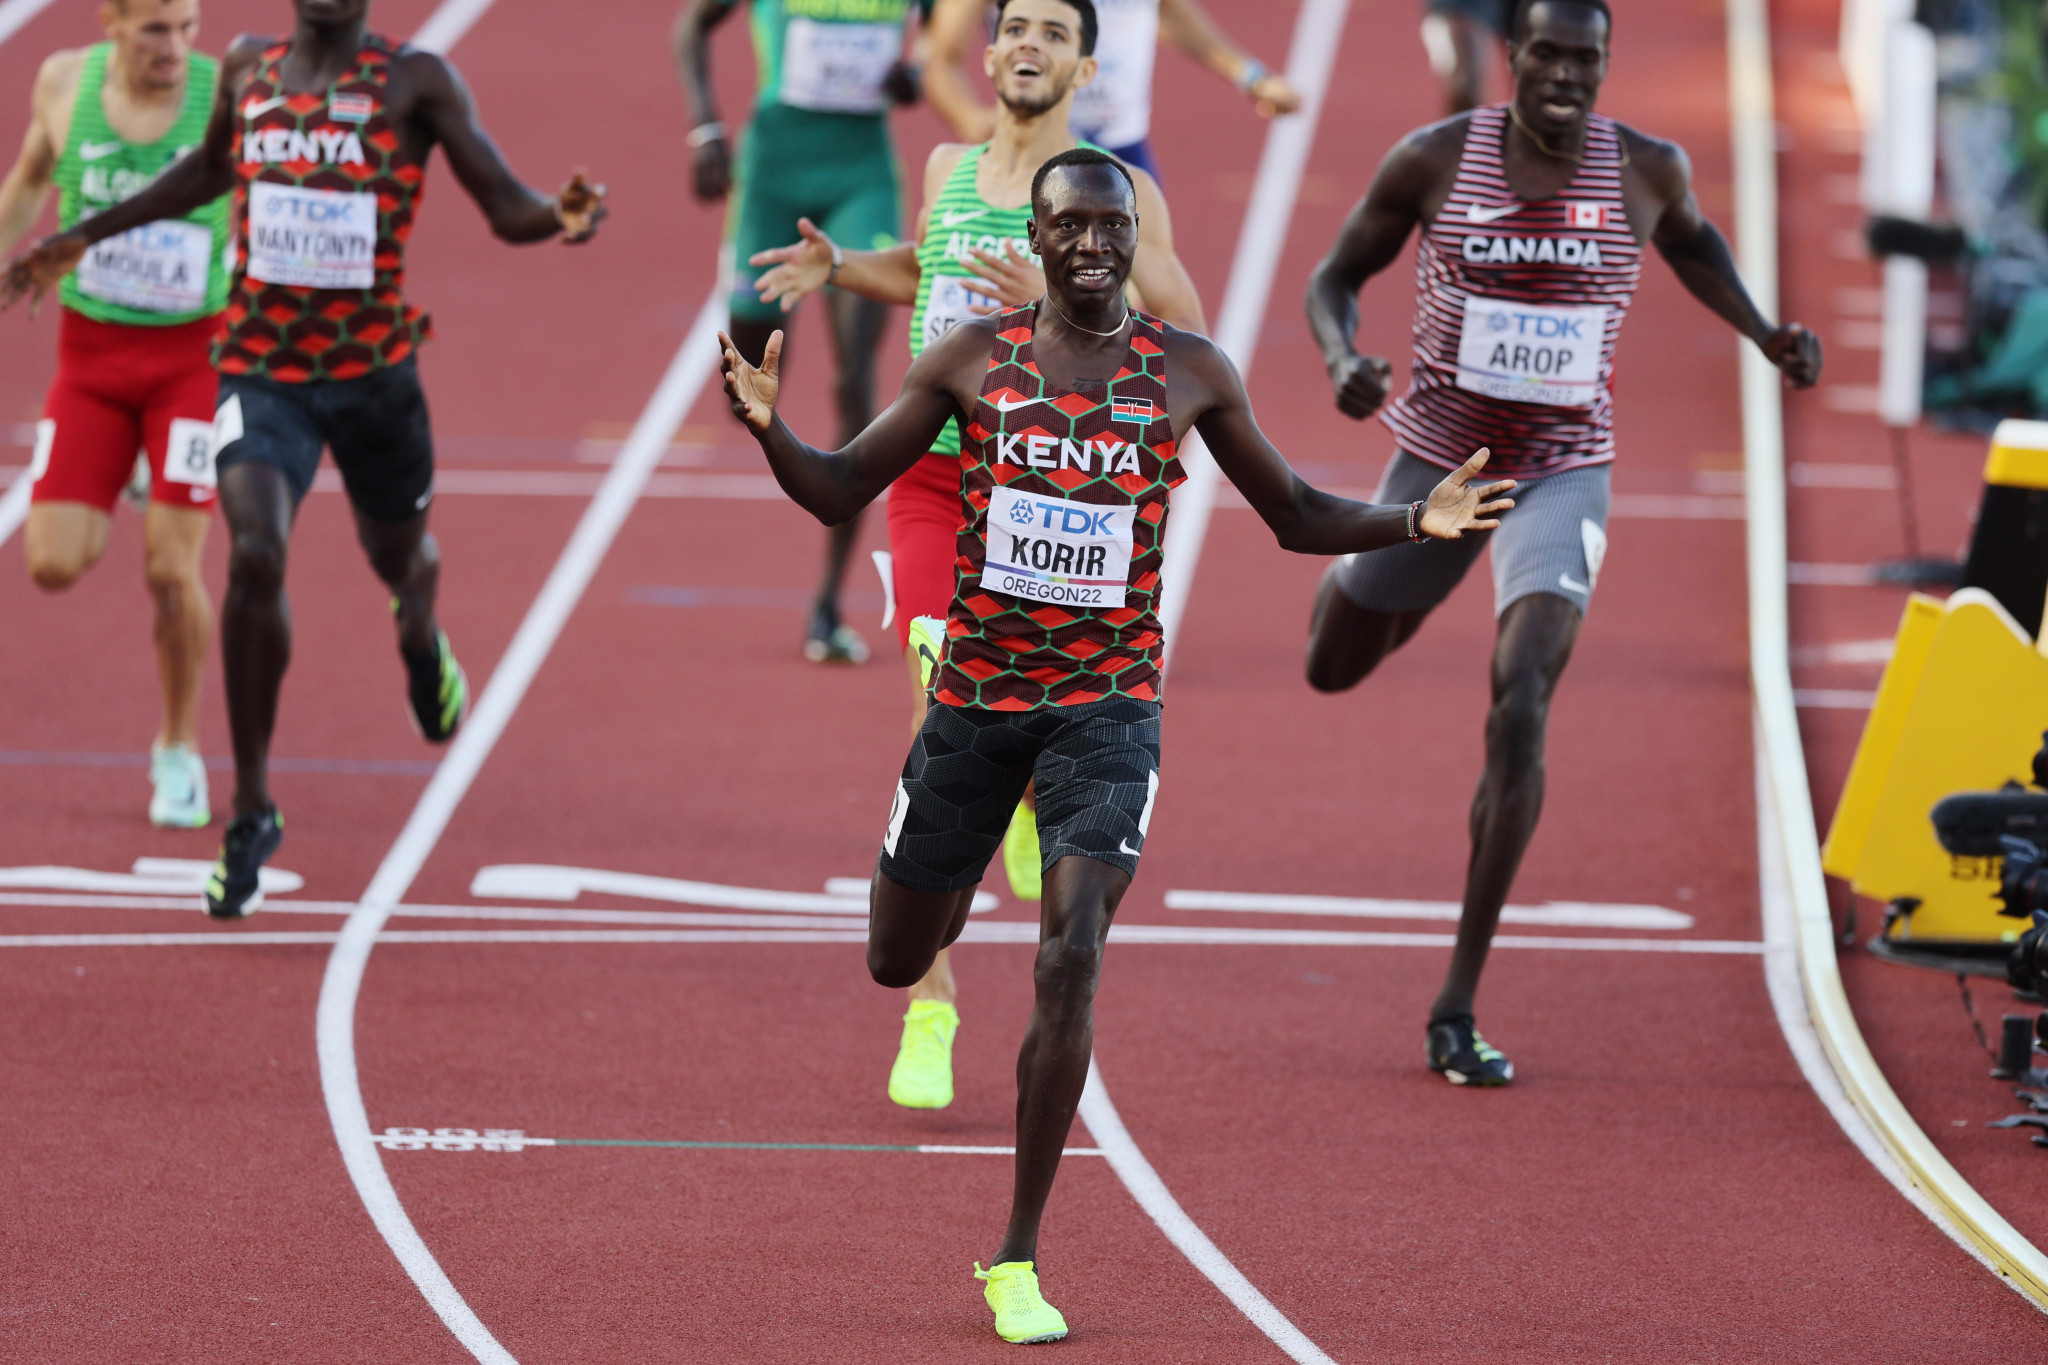 
Kenya’s Emmanuel Korir came home in a season’s best of 1min 43.71sec to win the men's 800m title ©Getty Images